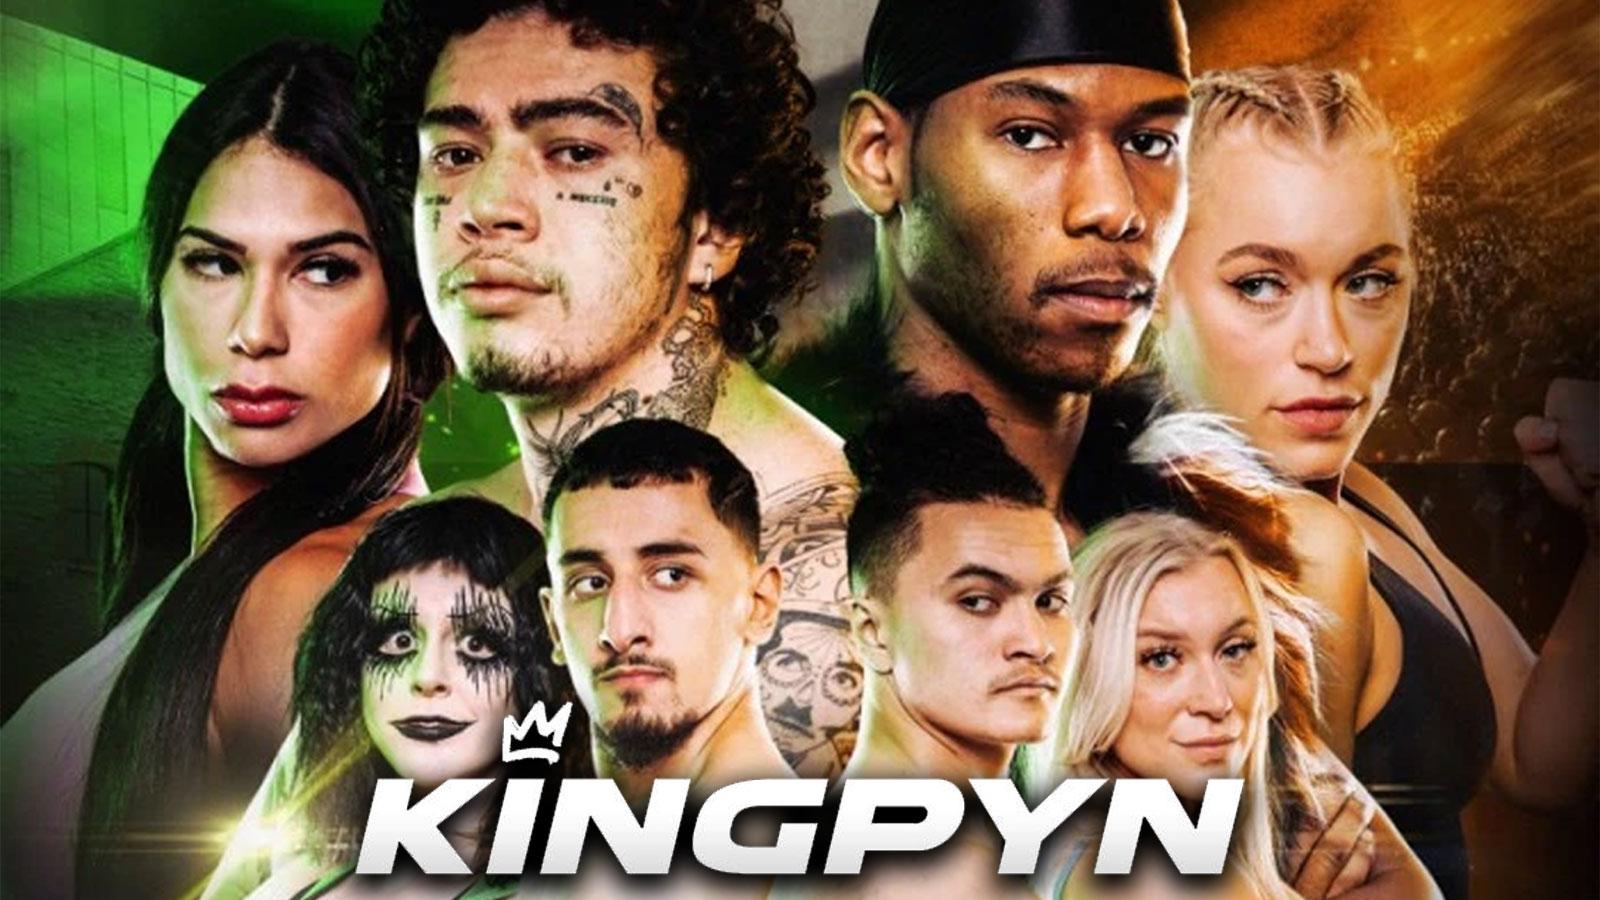 Kingpyn High Stakes boxing tournament semi-final promotion image